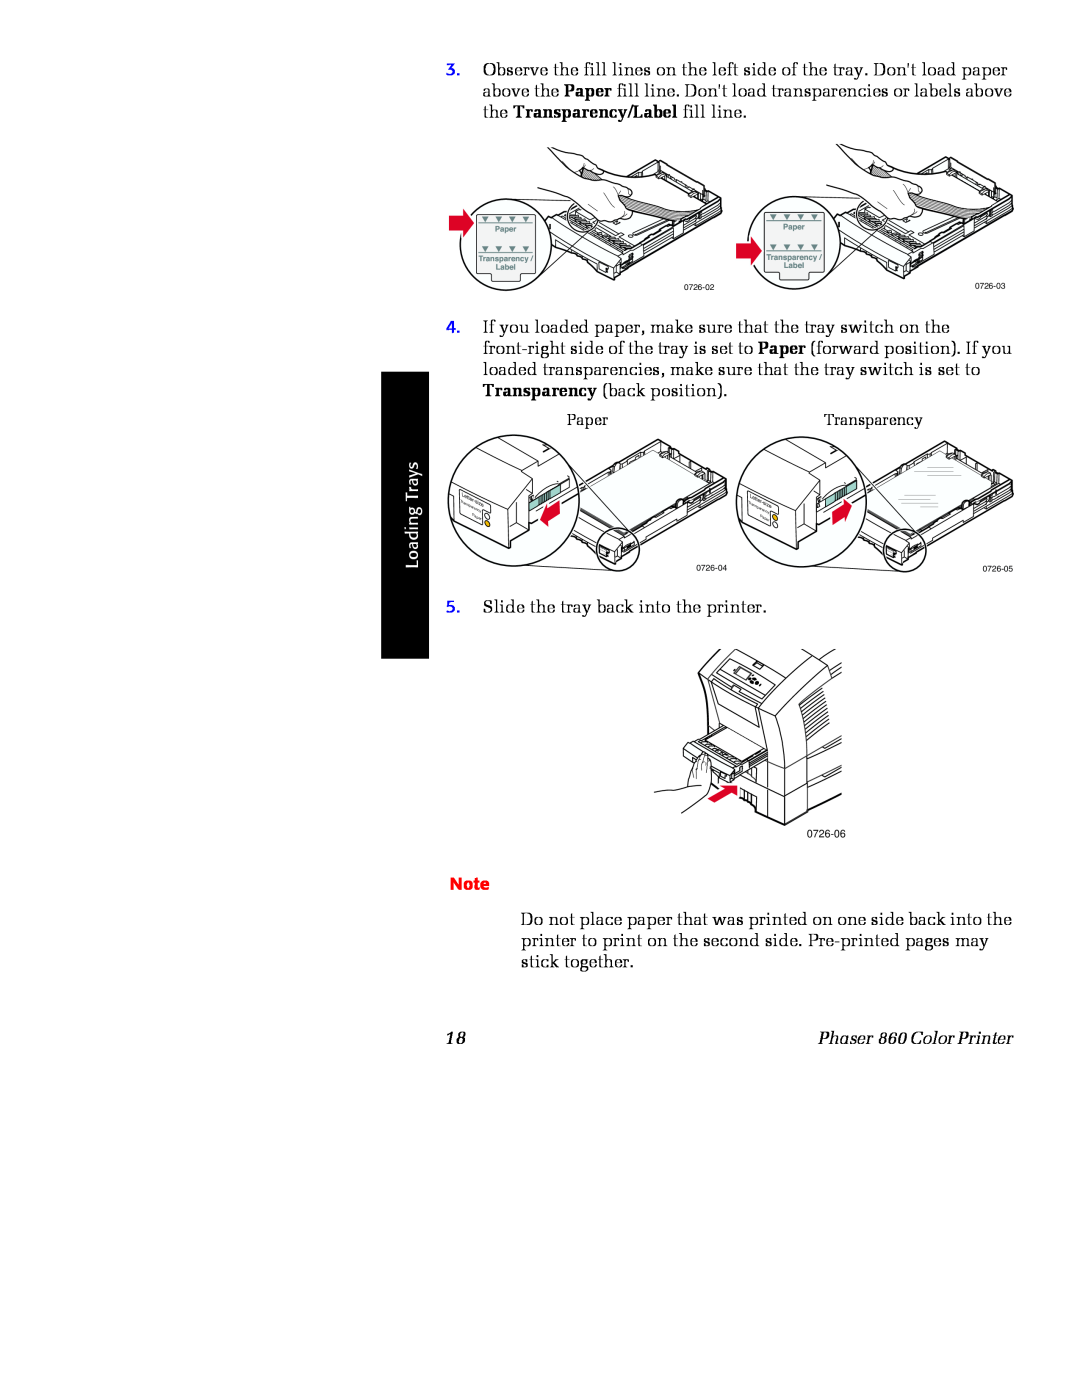 Xerox manual Loading Trays, Slide the tray back into the printer, Phaser 860 Color Printer 